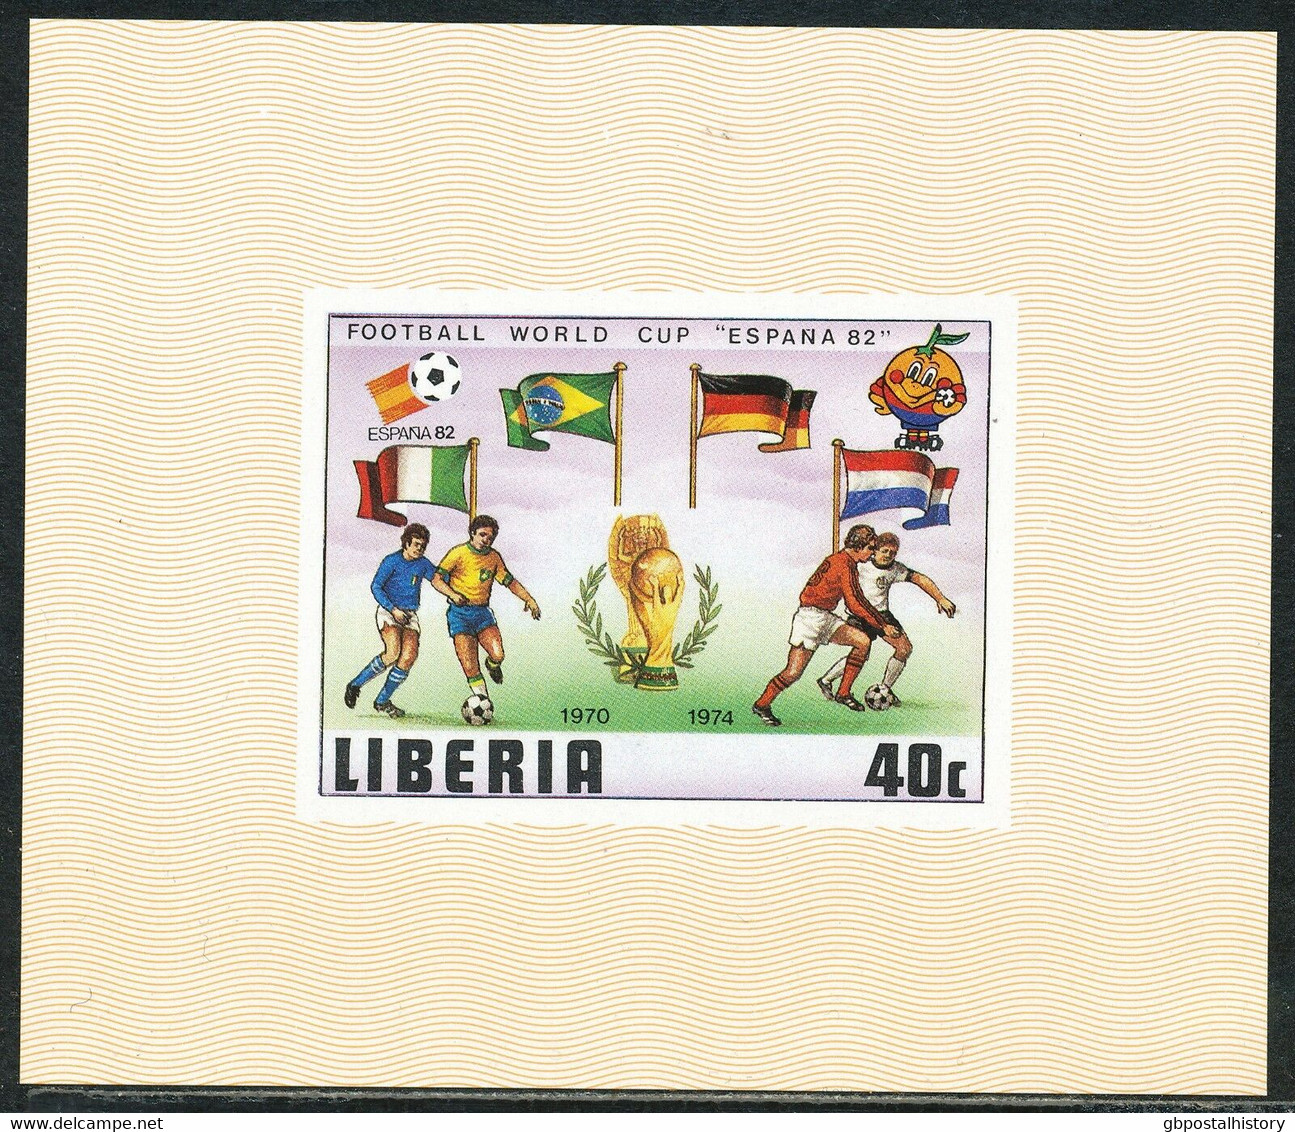 LIBERIA 1981 World Cup Spain 1982 cpl.set + MS U/M VARIETIES ALL IMPERFORATED MS